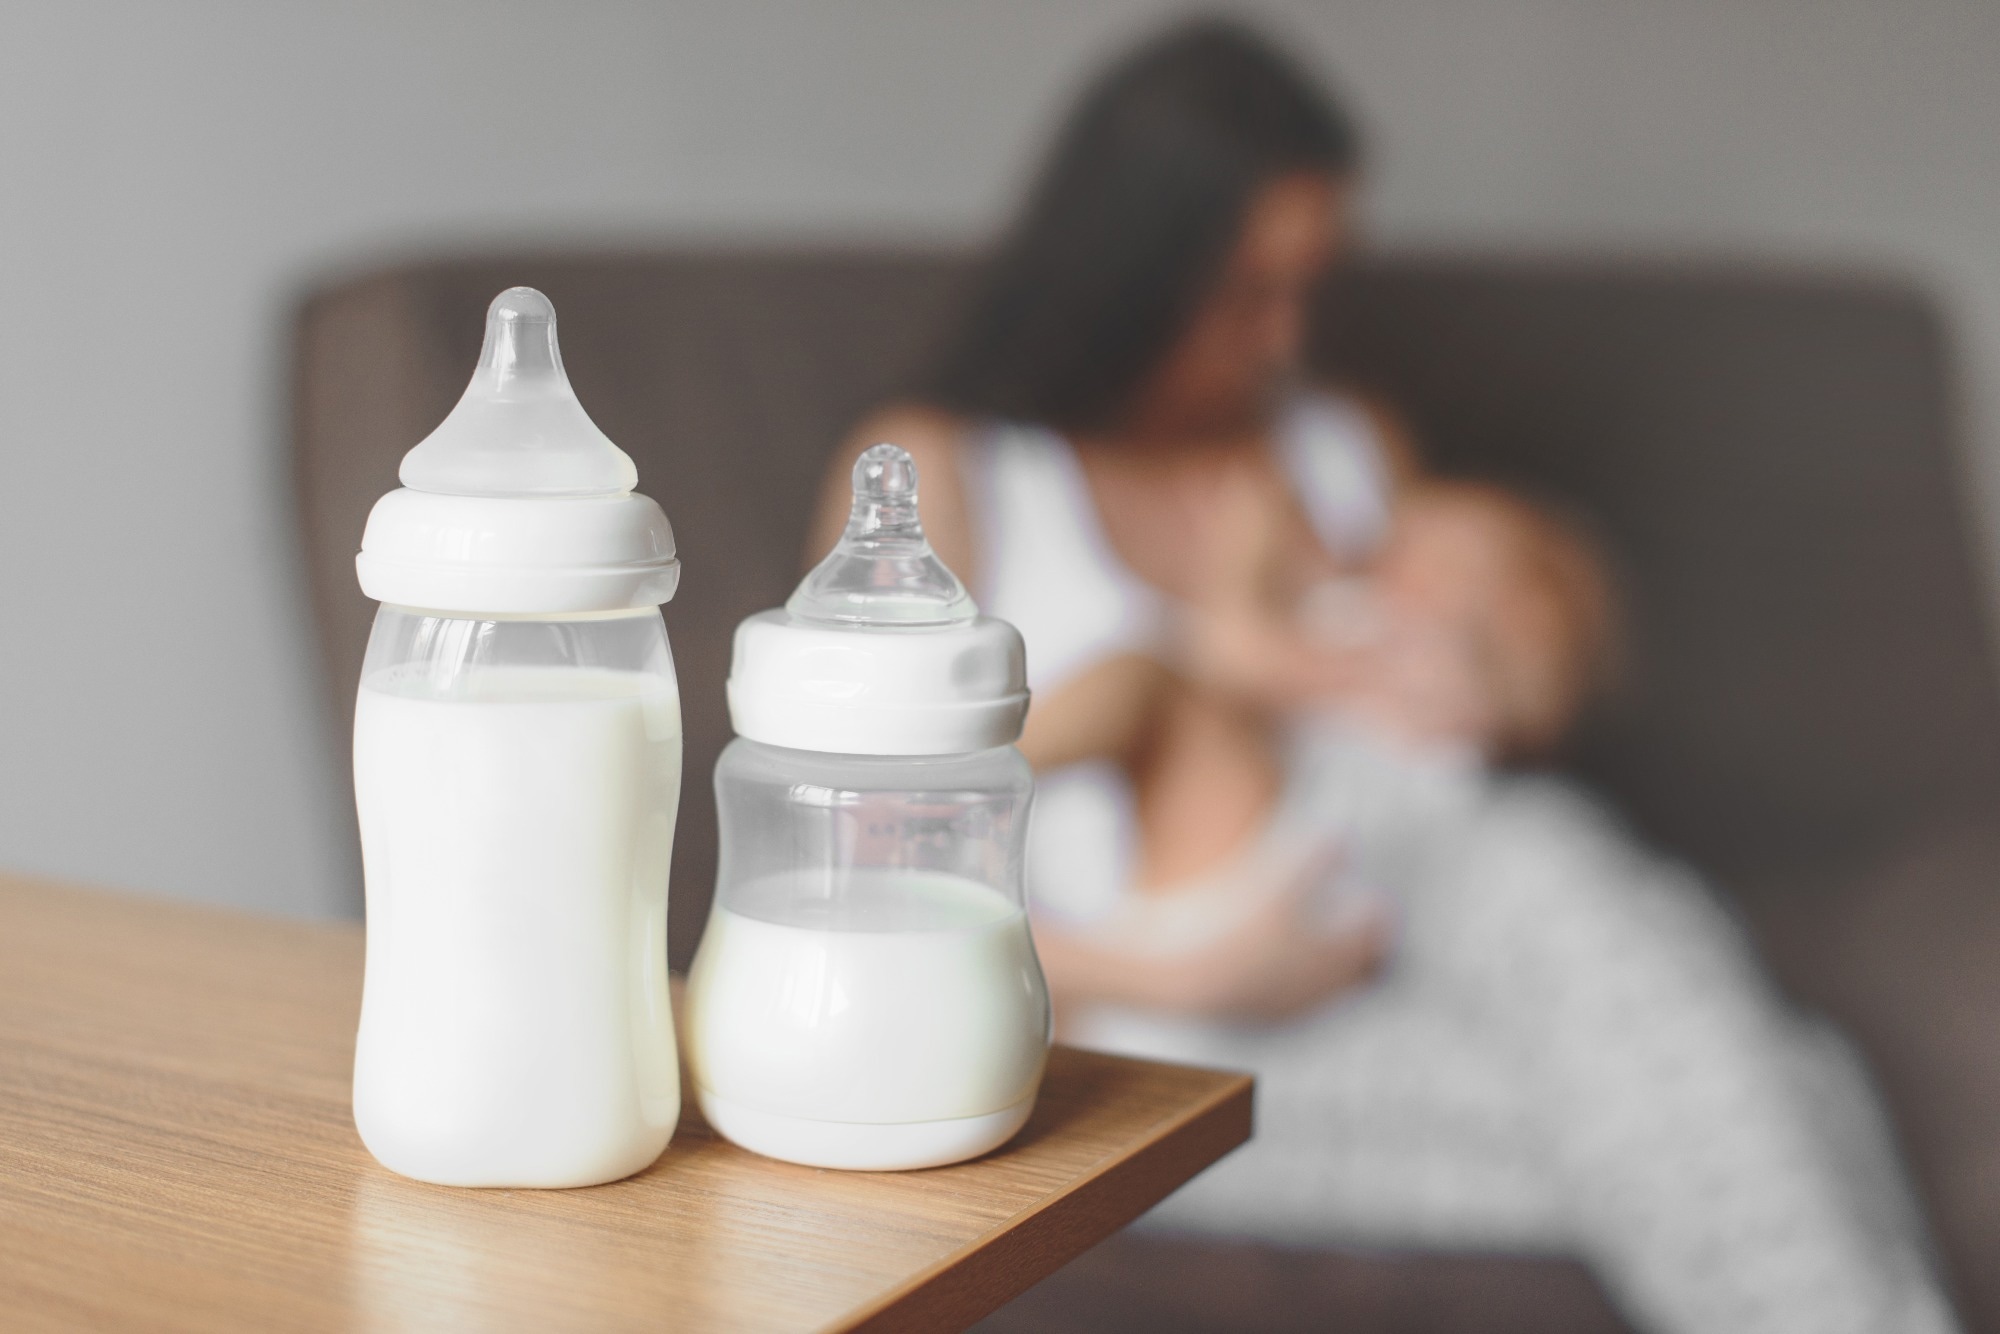 Study: Machine learning analysis for the association between breast feeding and metabolic syndrome in women. Image Credit: evso/Shutterstock.com